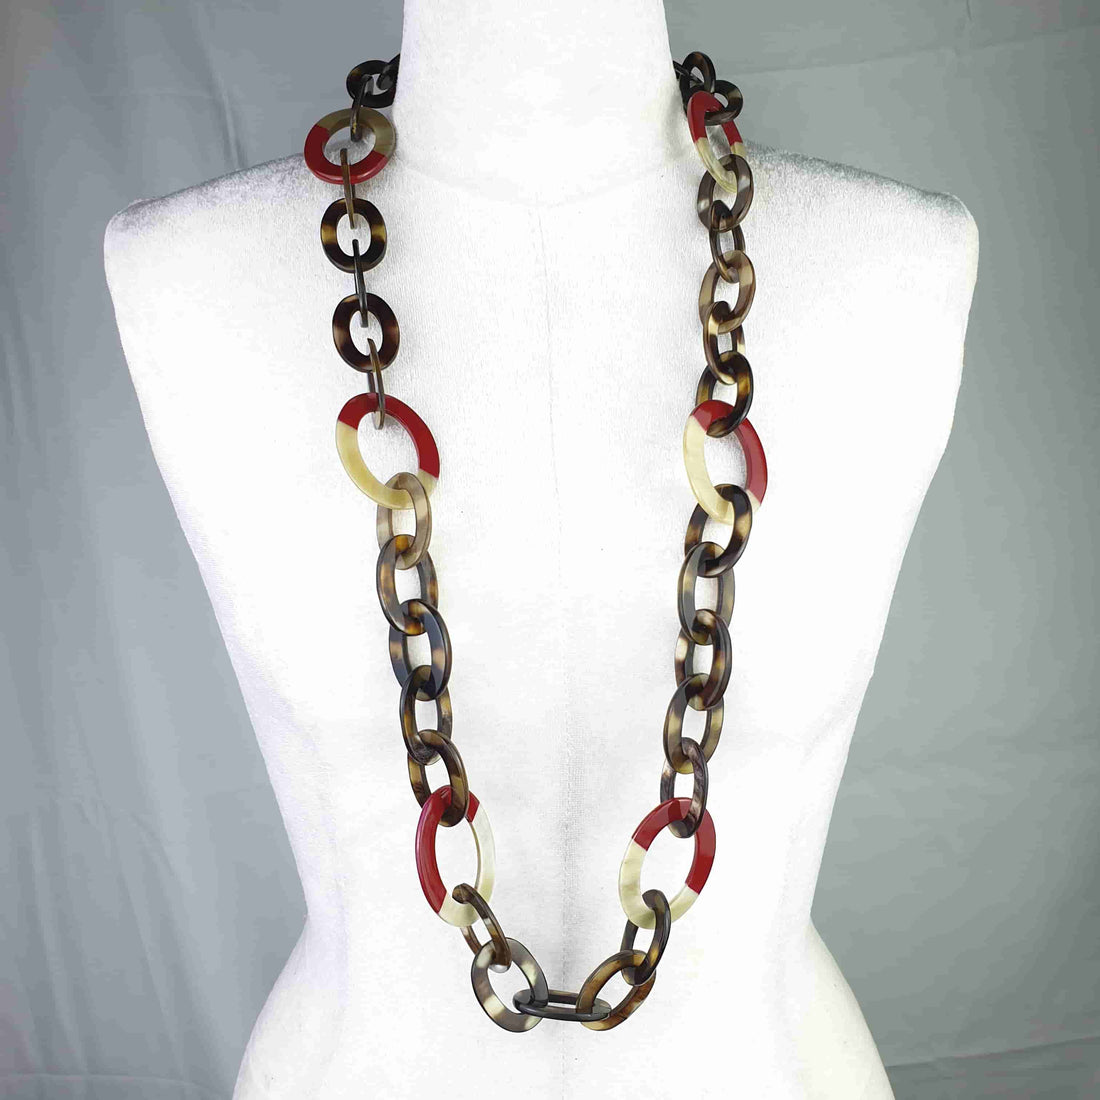 DIY buffalo horn jewelry chain link necklace